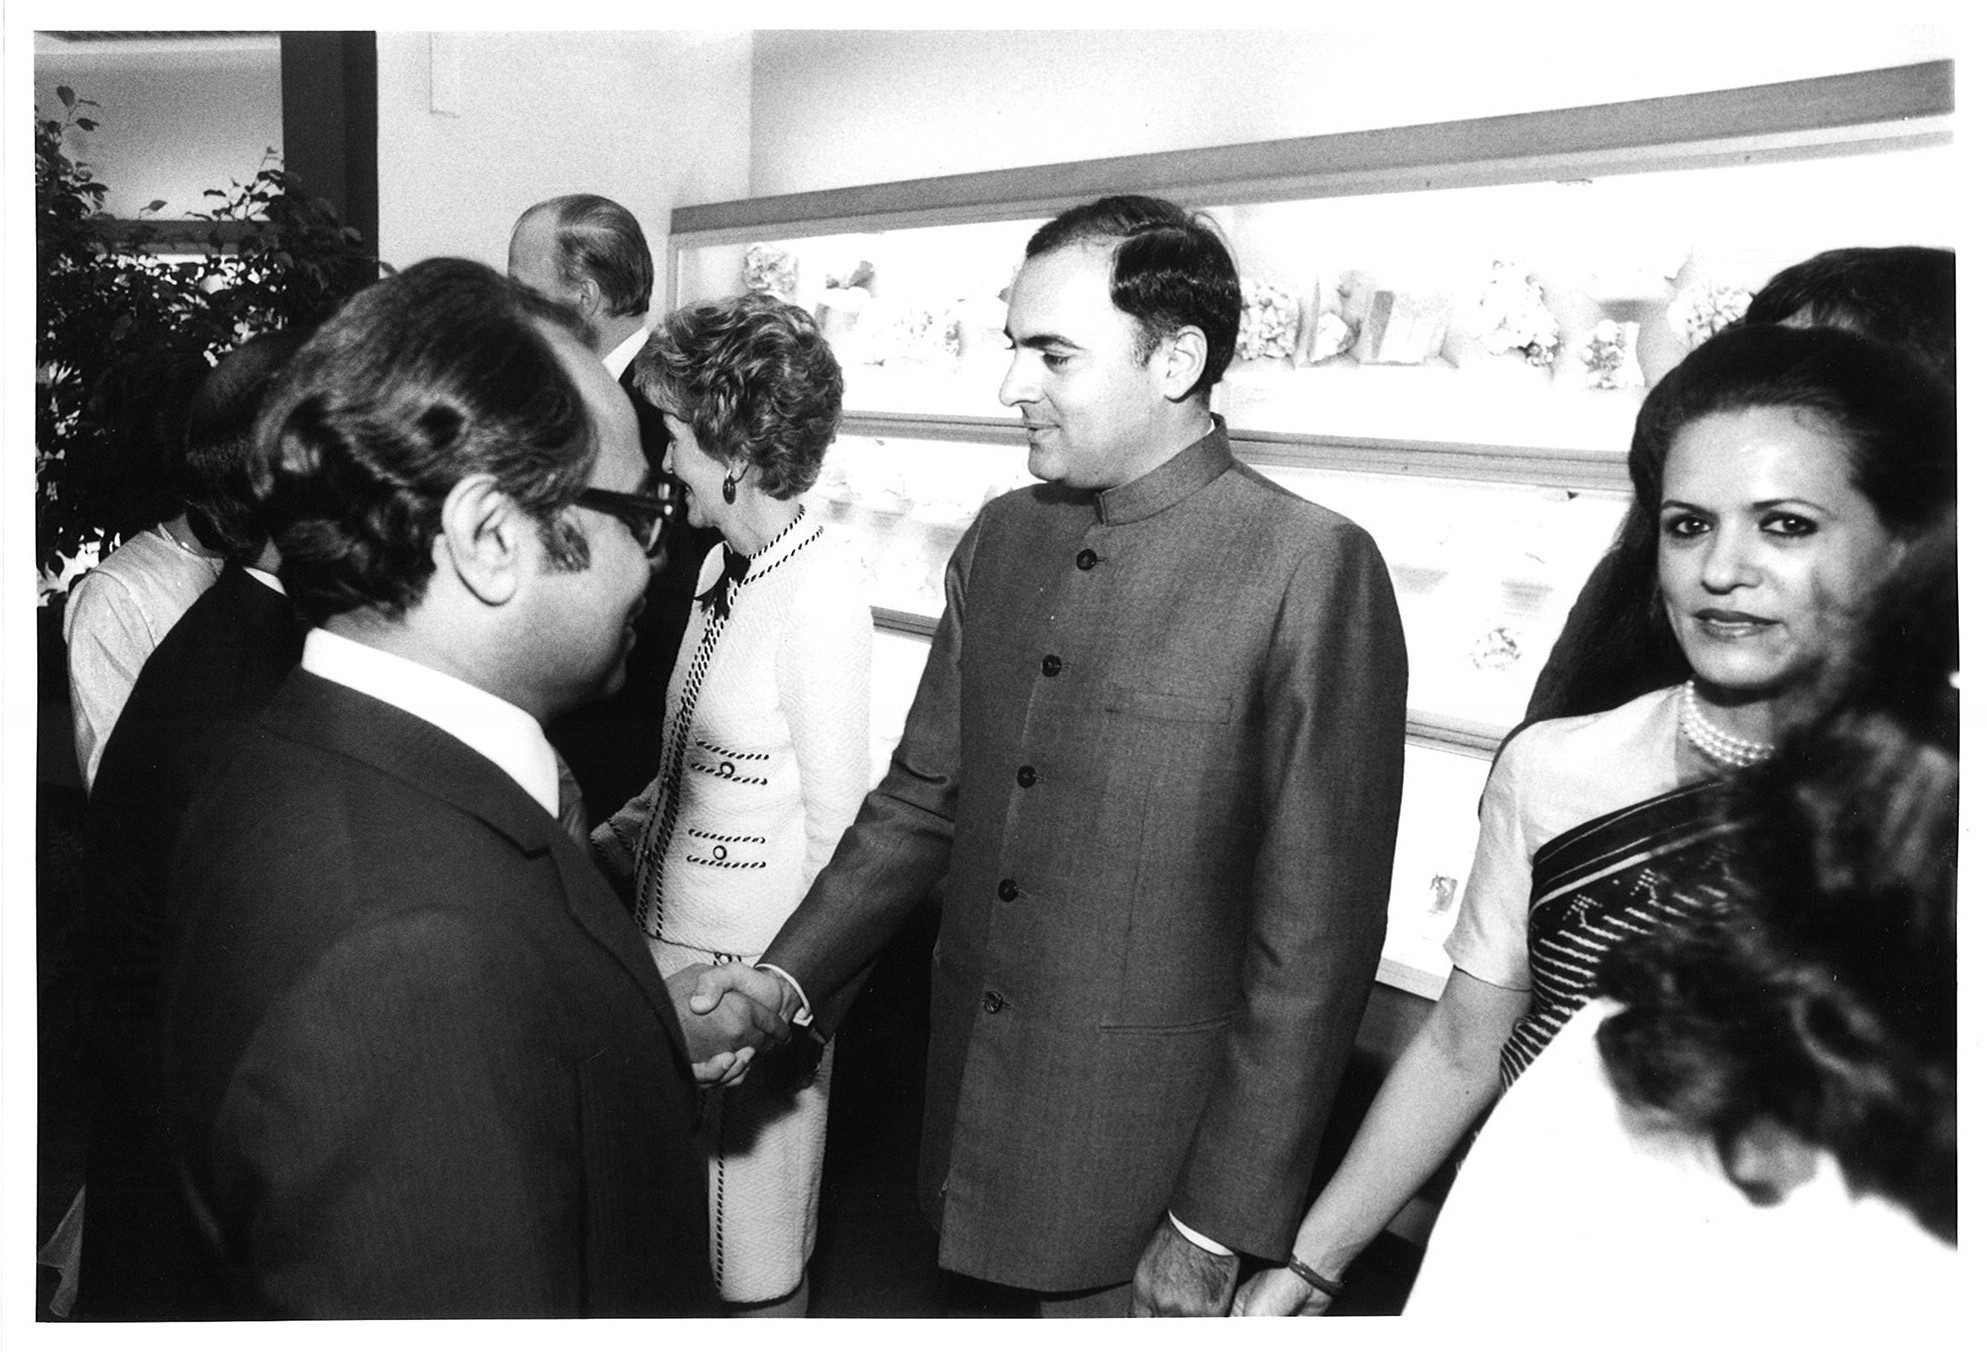 Remembering SP Hinduja: How ‘Hinduja onions’ got the Shah of Iran out of trouble